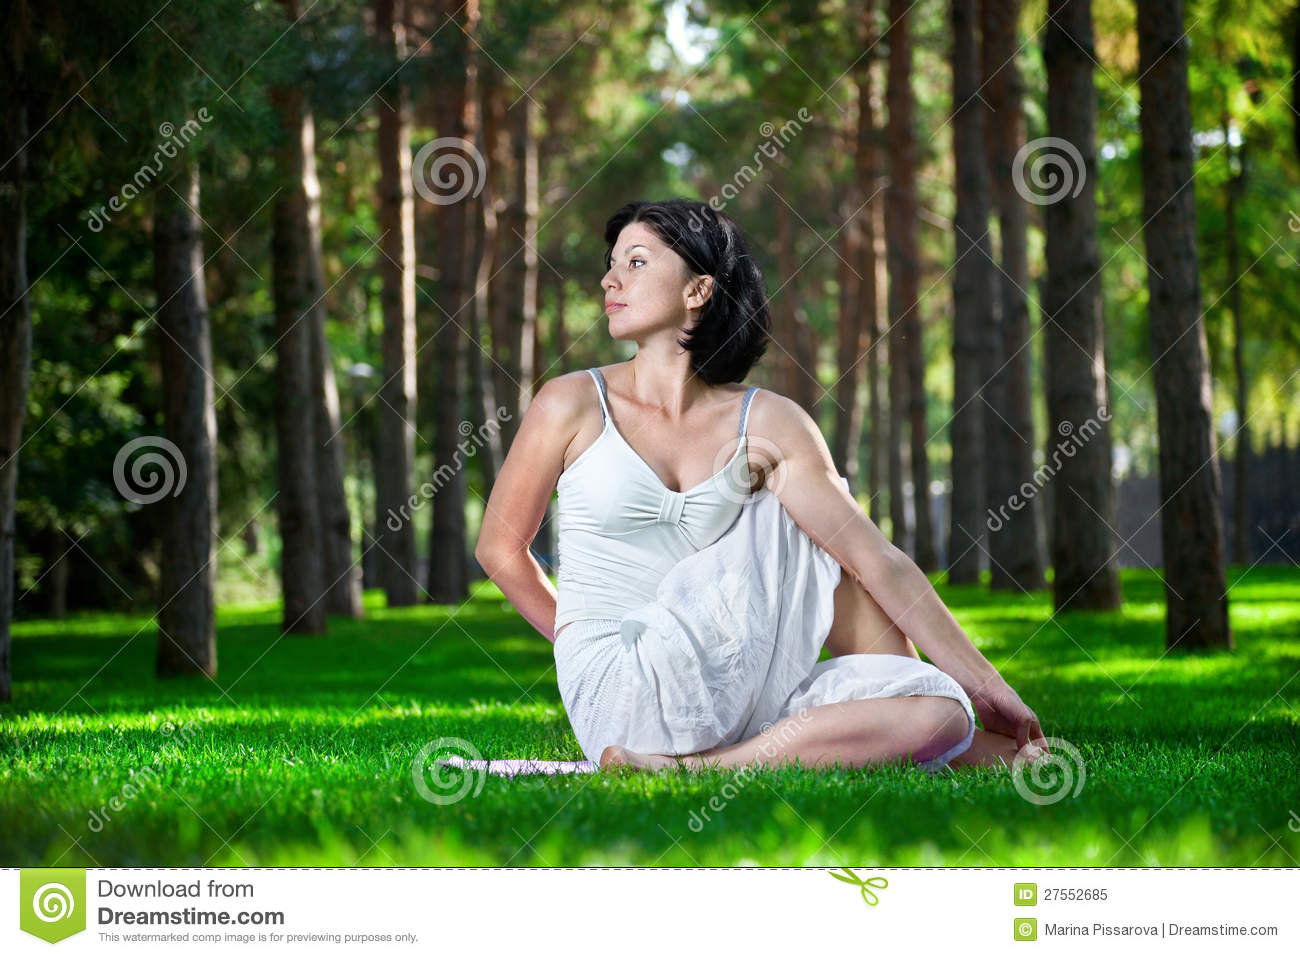 Yoga Twisting Pose By Woman In White Costume On Green Grass In The